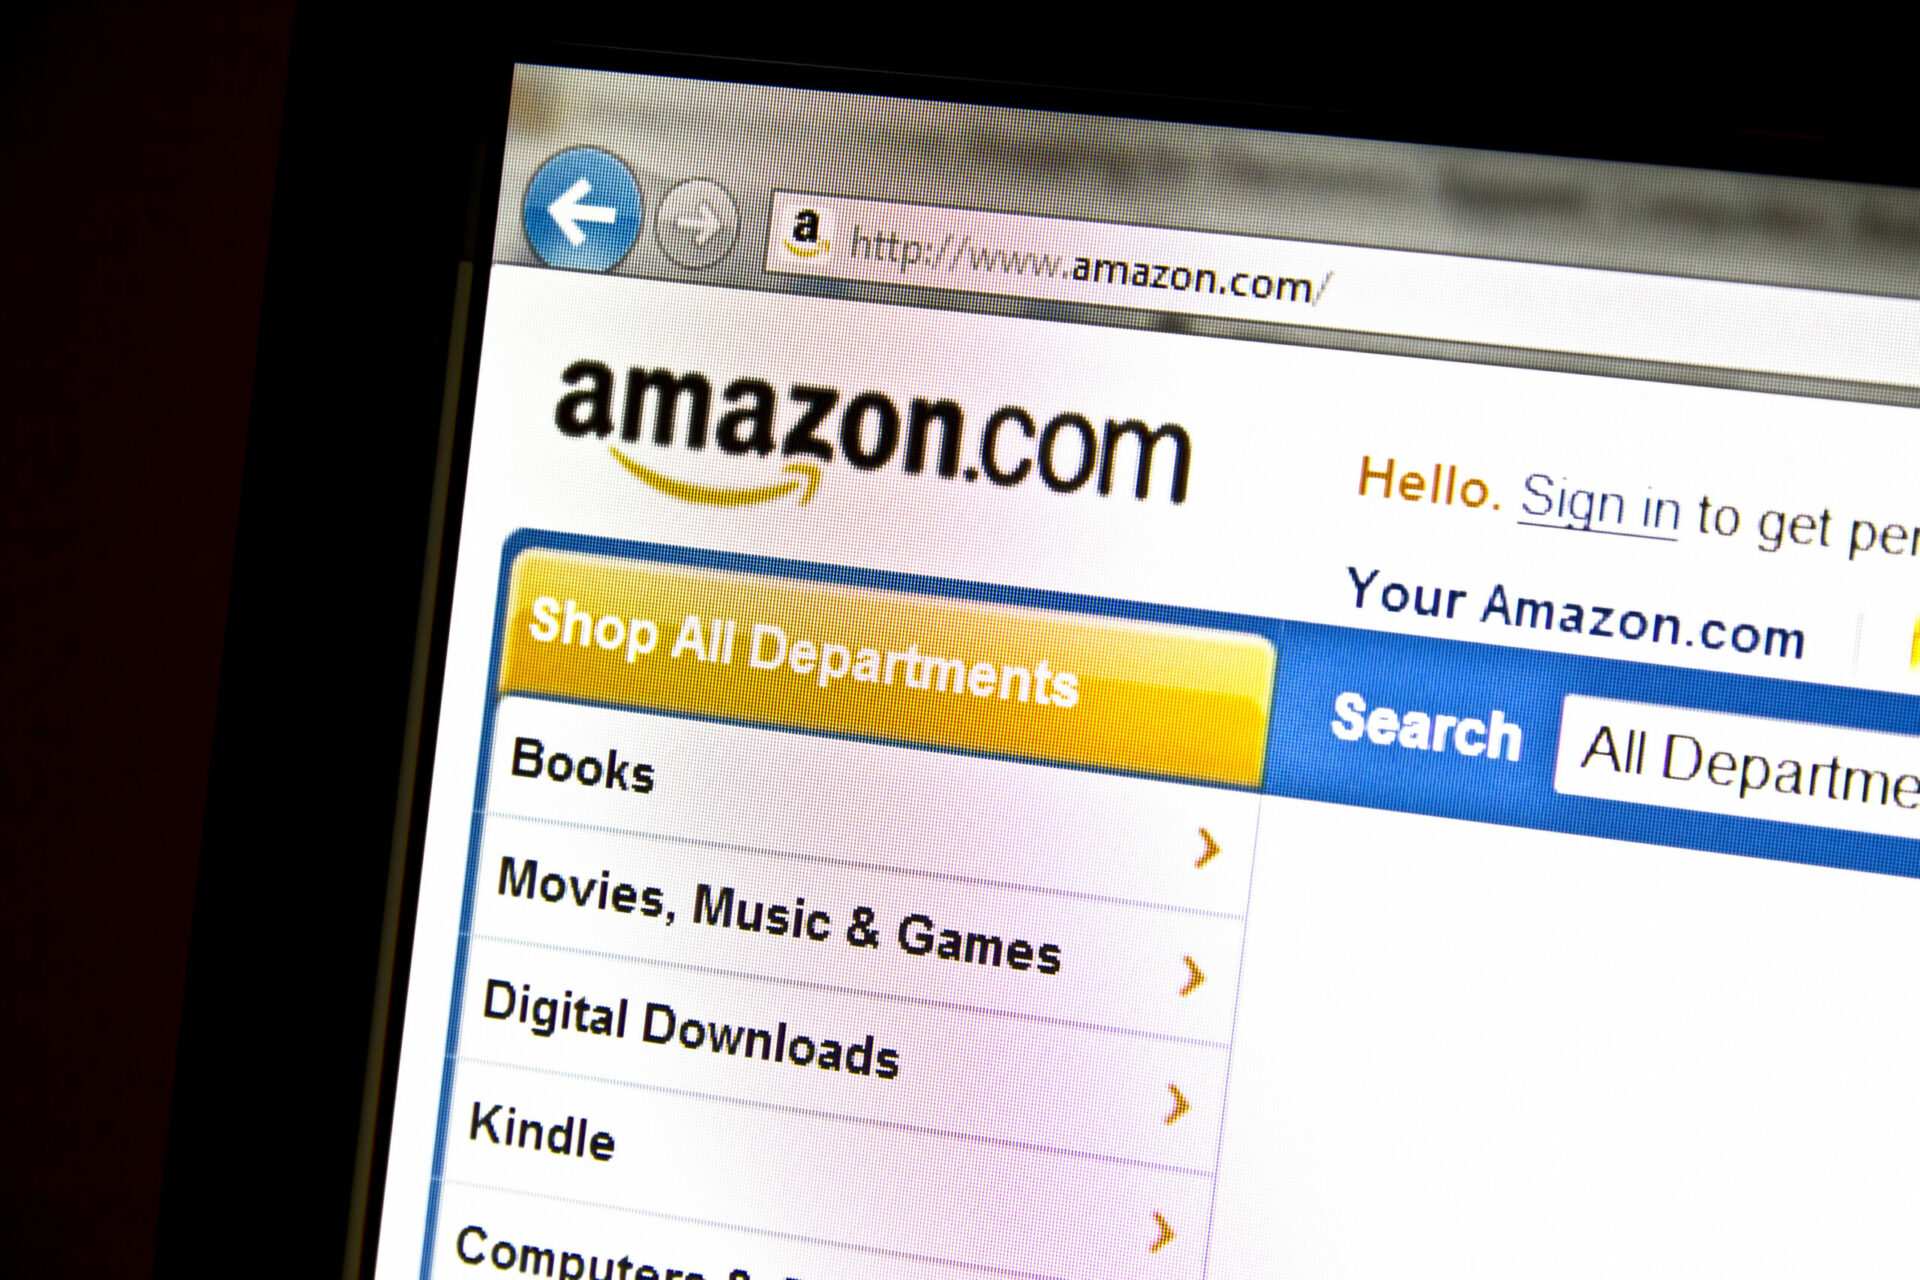 Amazon under investigation for selling illegal electronic devices